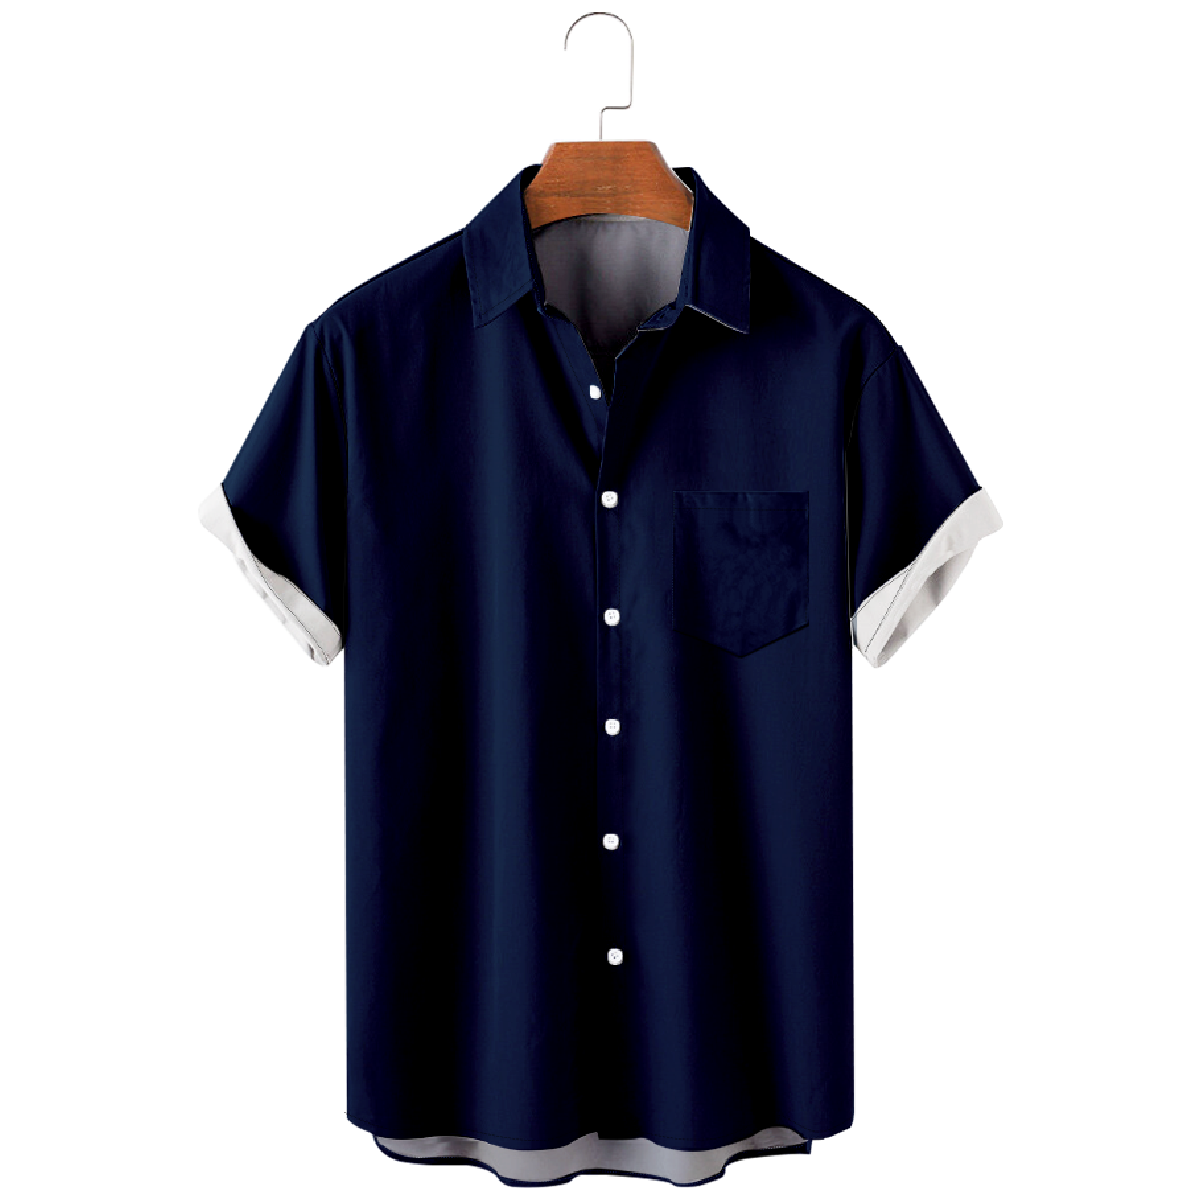 Dallas Blue Button Up Shirt for Men Shirt with Front Pocket Short Sleeve